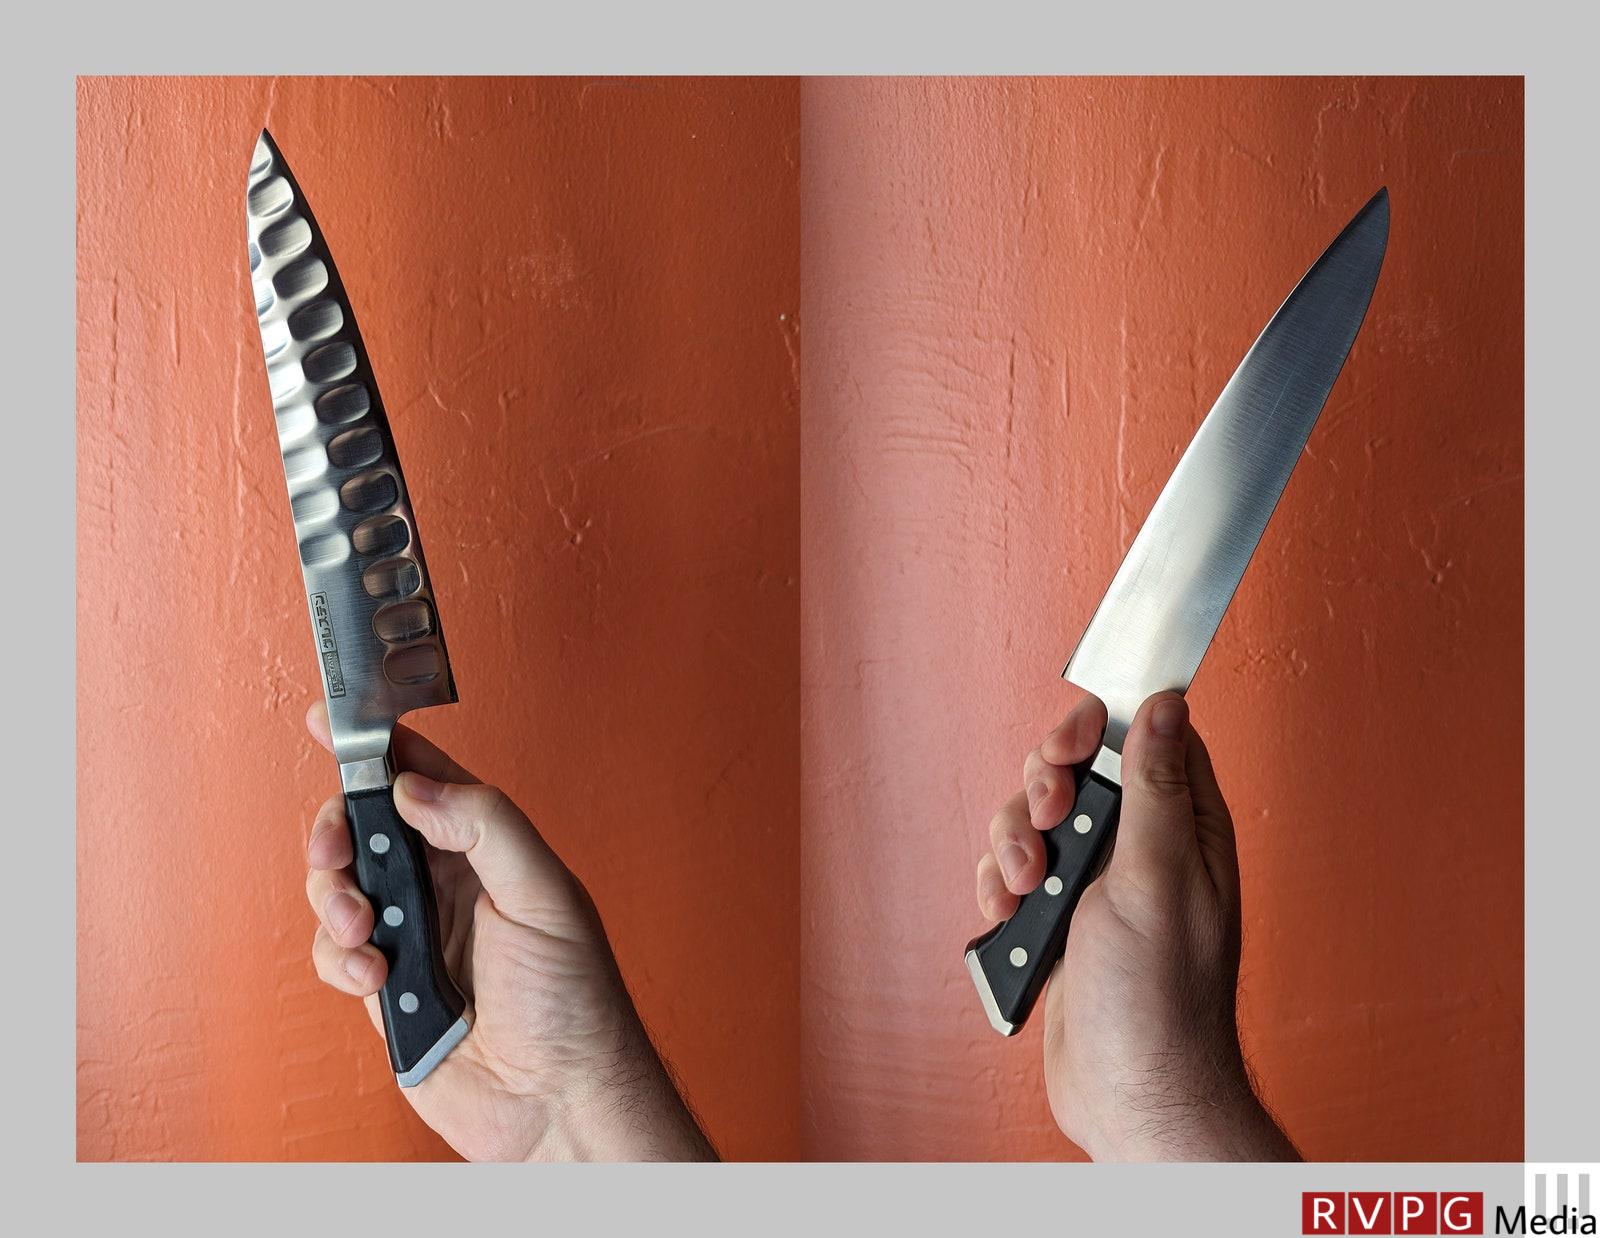 Two side views of the same kitchen knife, with the notched side on the left and the smooth side on the right